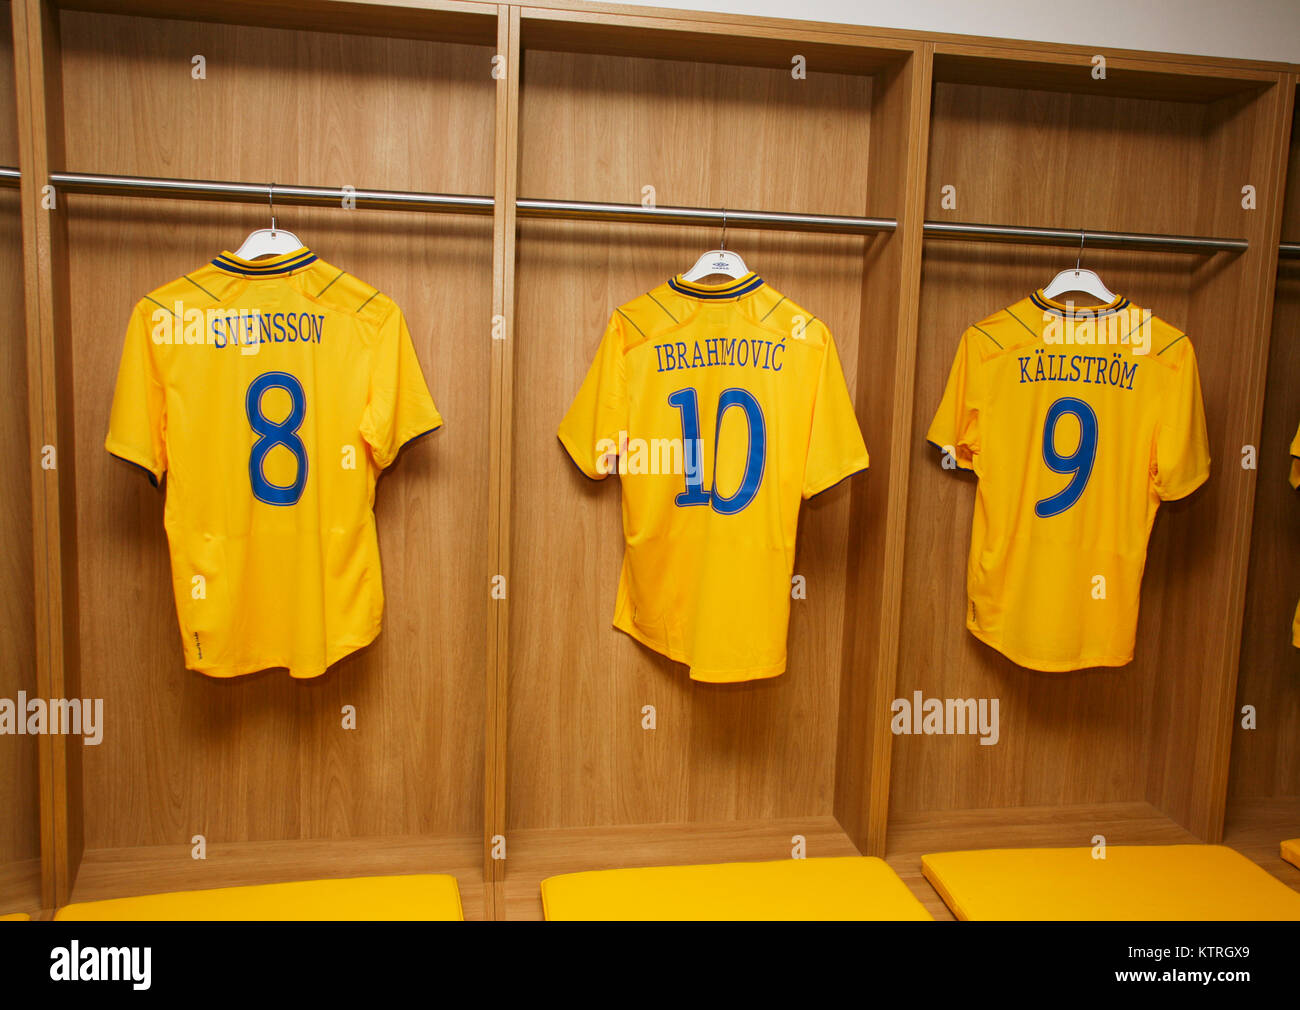 SWEDISH FOOTBALLs three Swedish stars shirts hang out in the locker room after their completed career in the National team Stock Photo